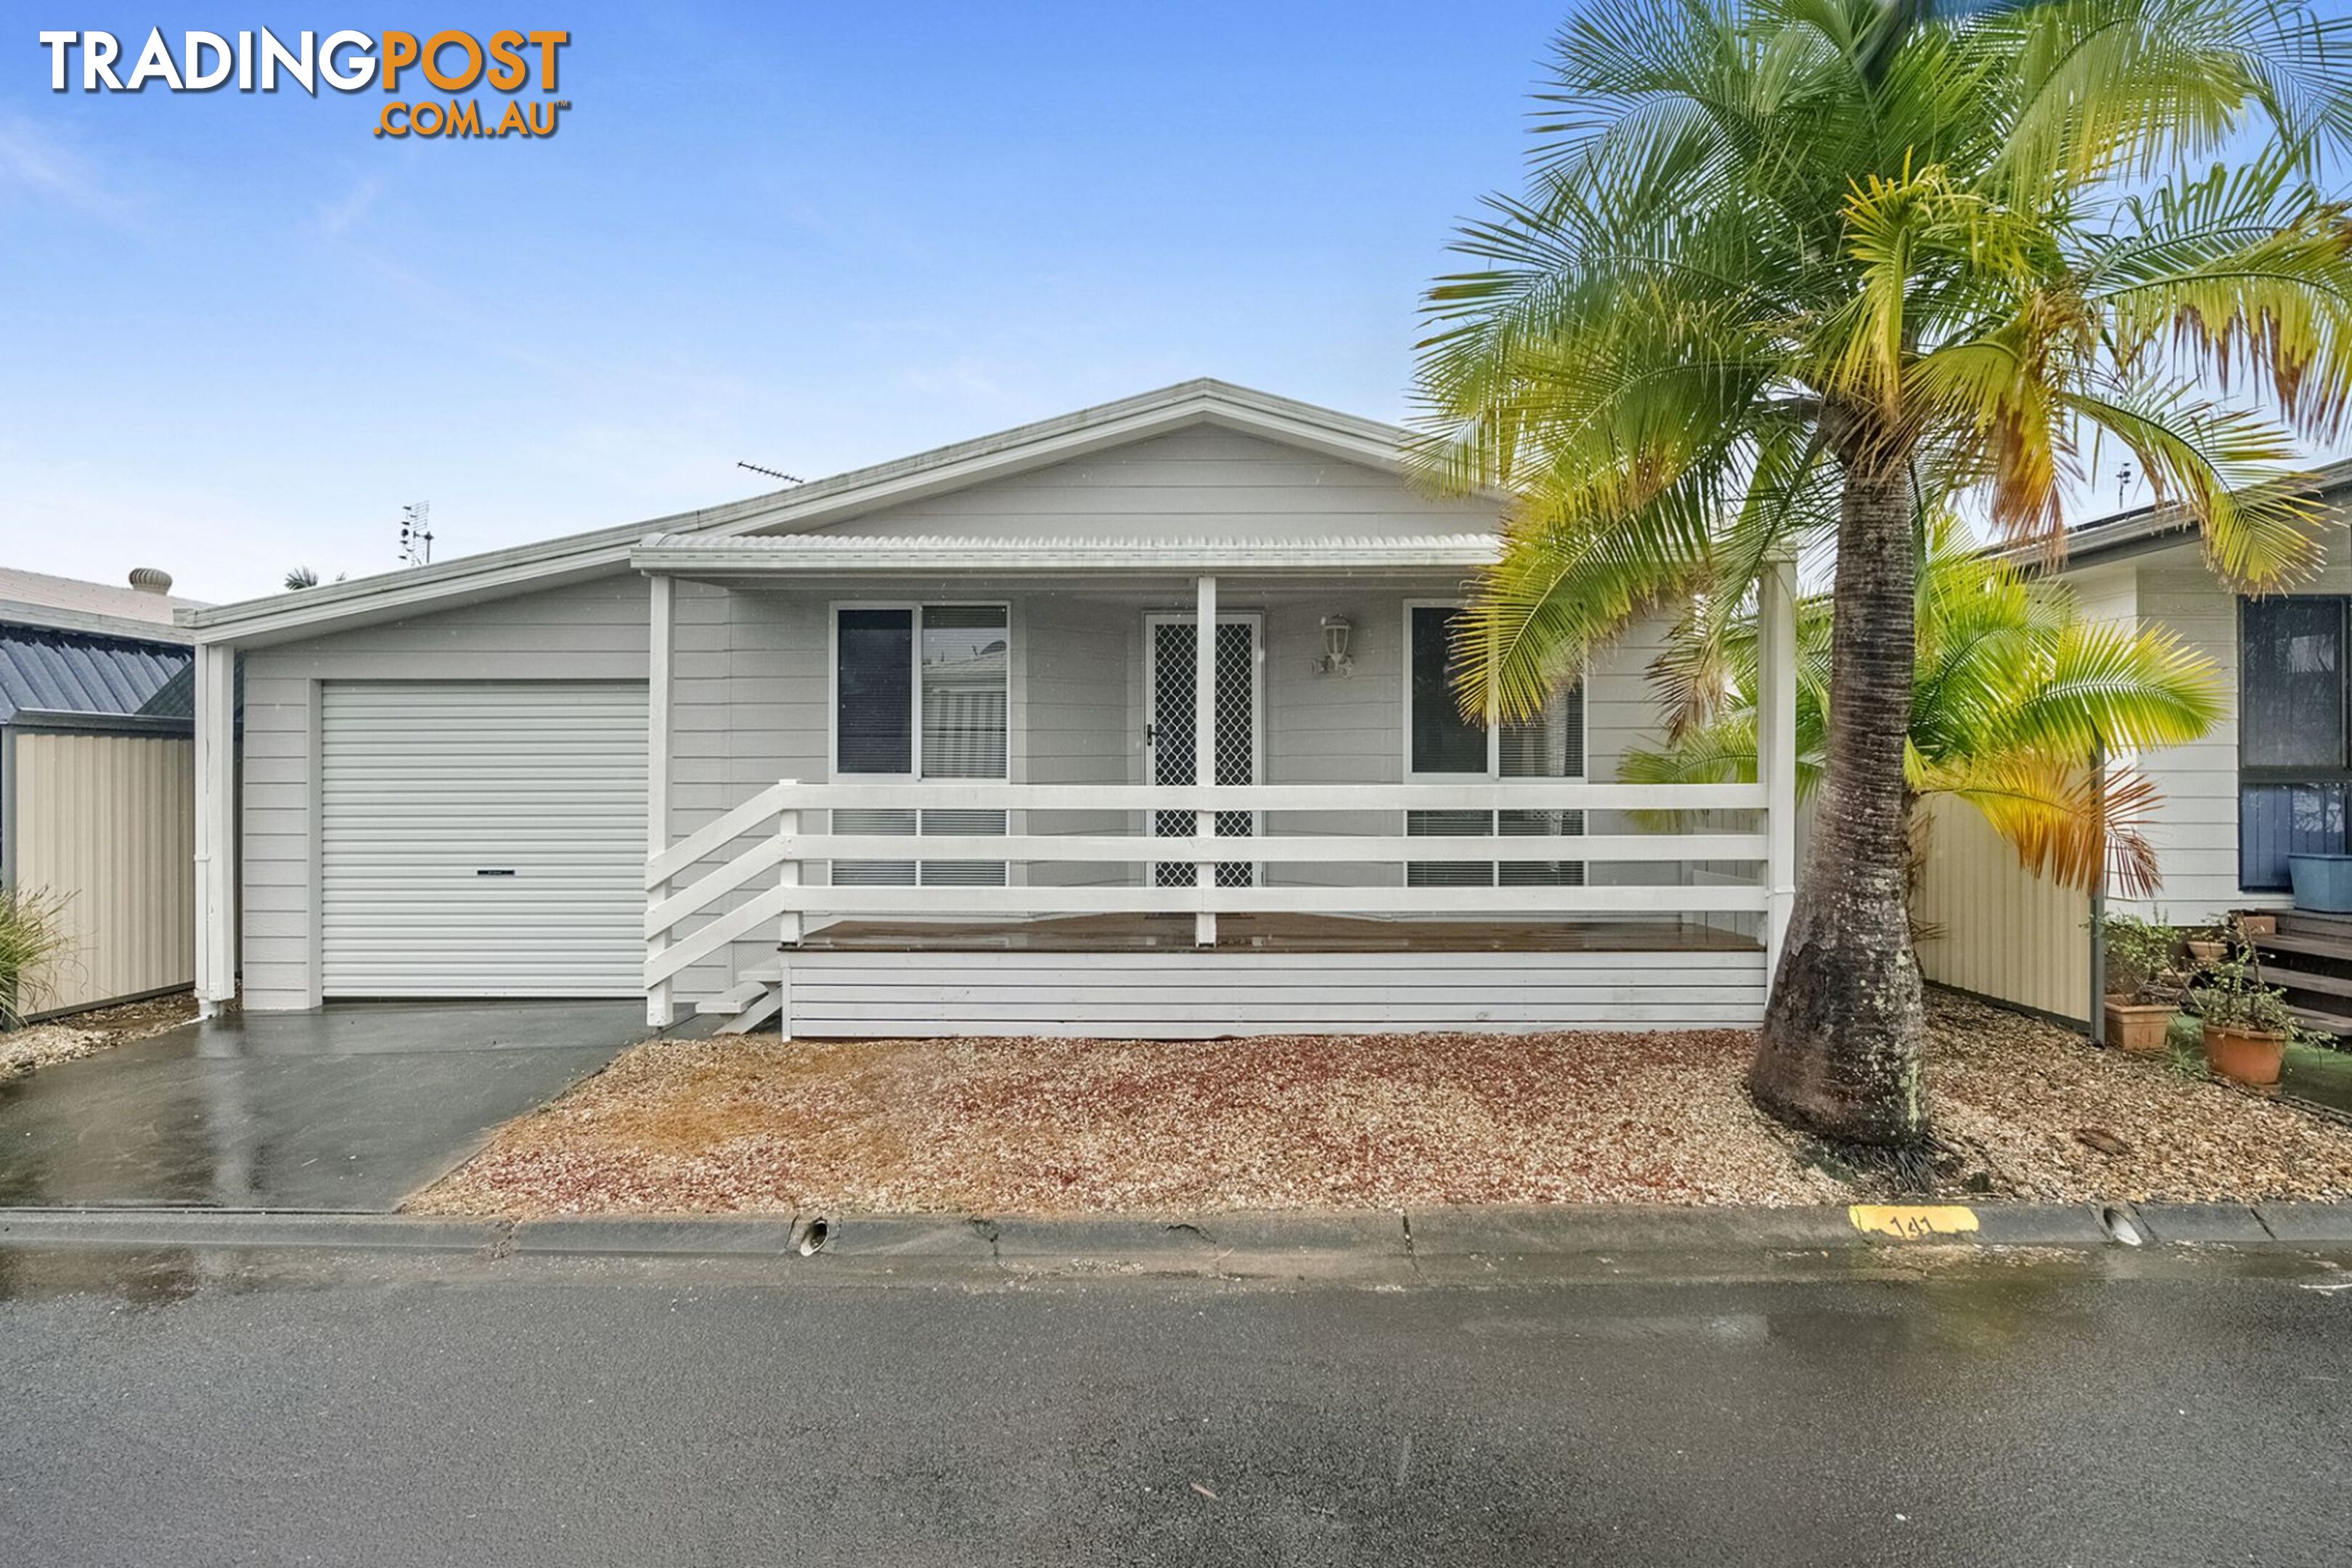 141 22 Hansford Road Coombabah QLD 4216